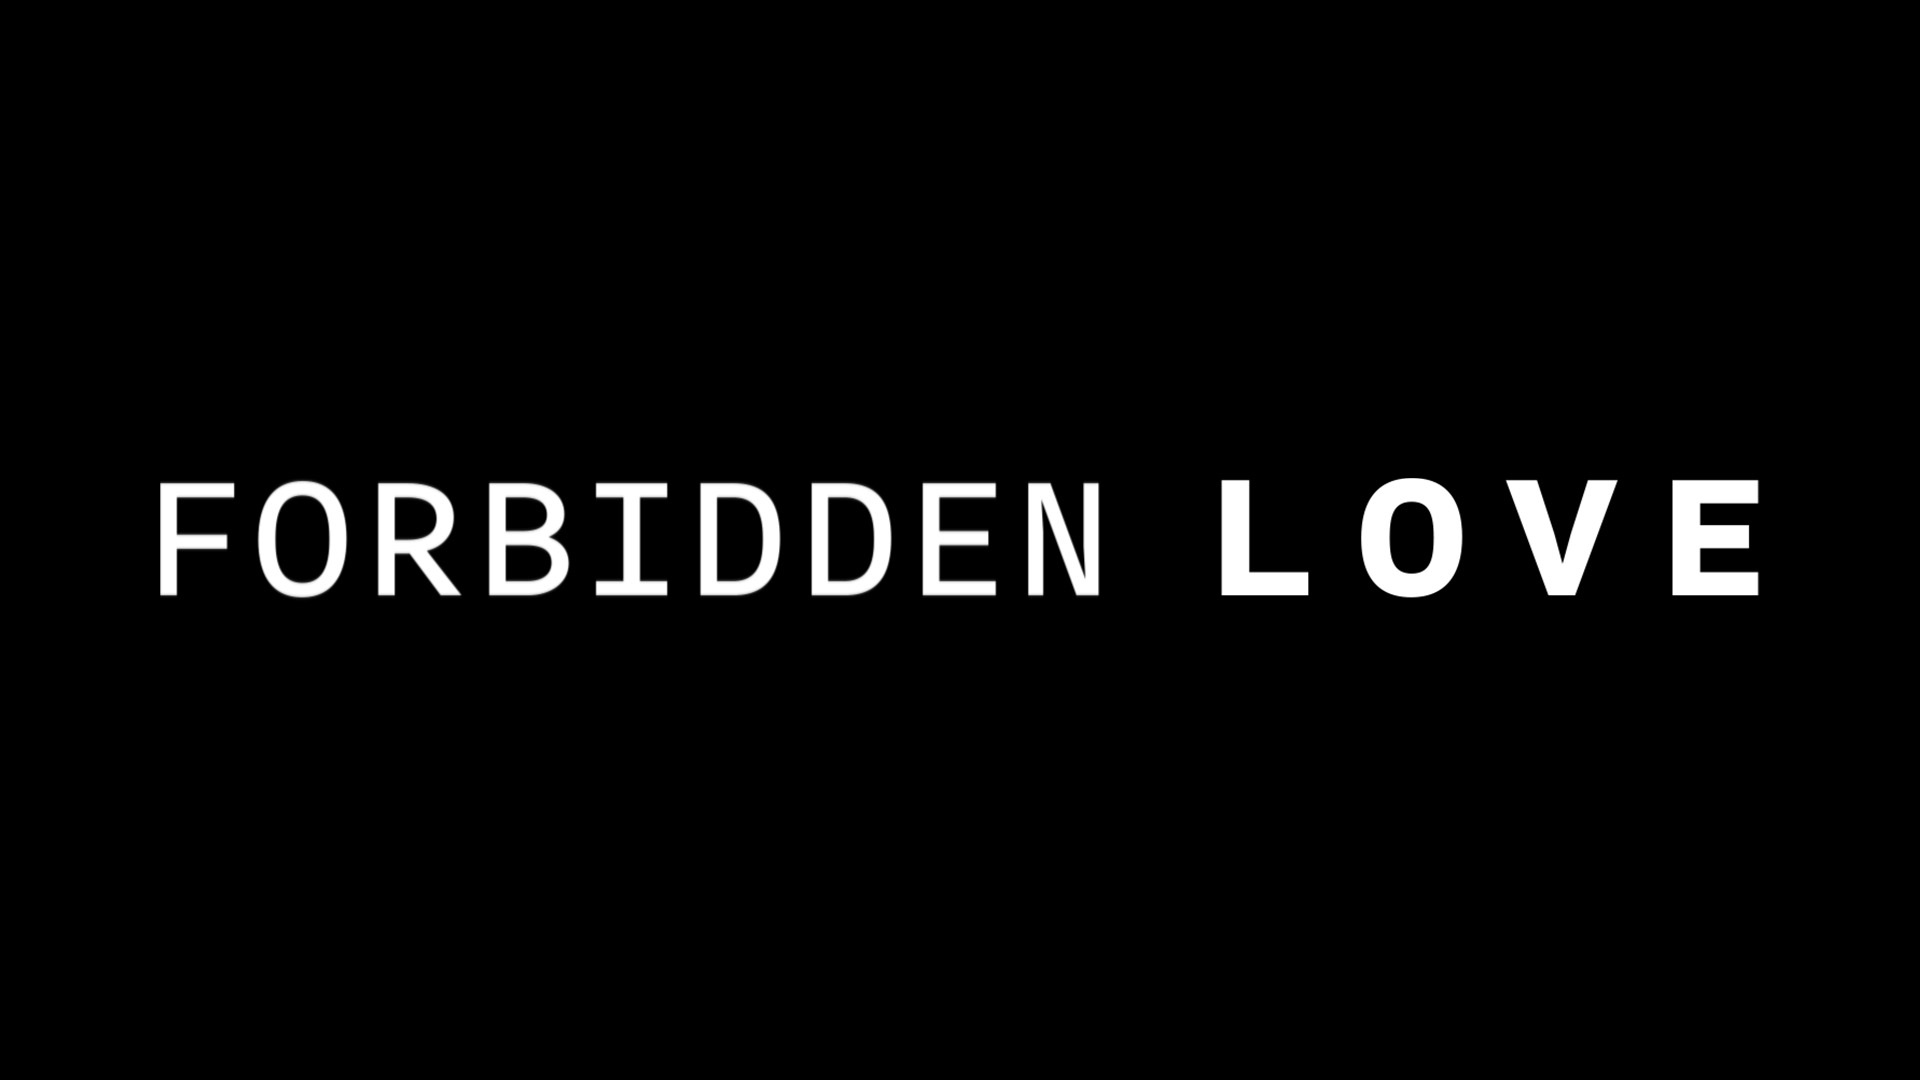 TLC to explore "Forbidden Love", an all-new relationship series